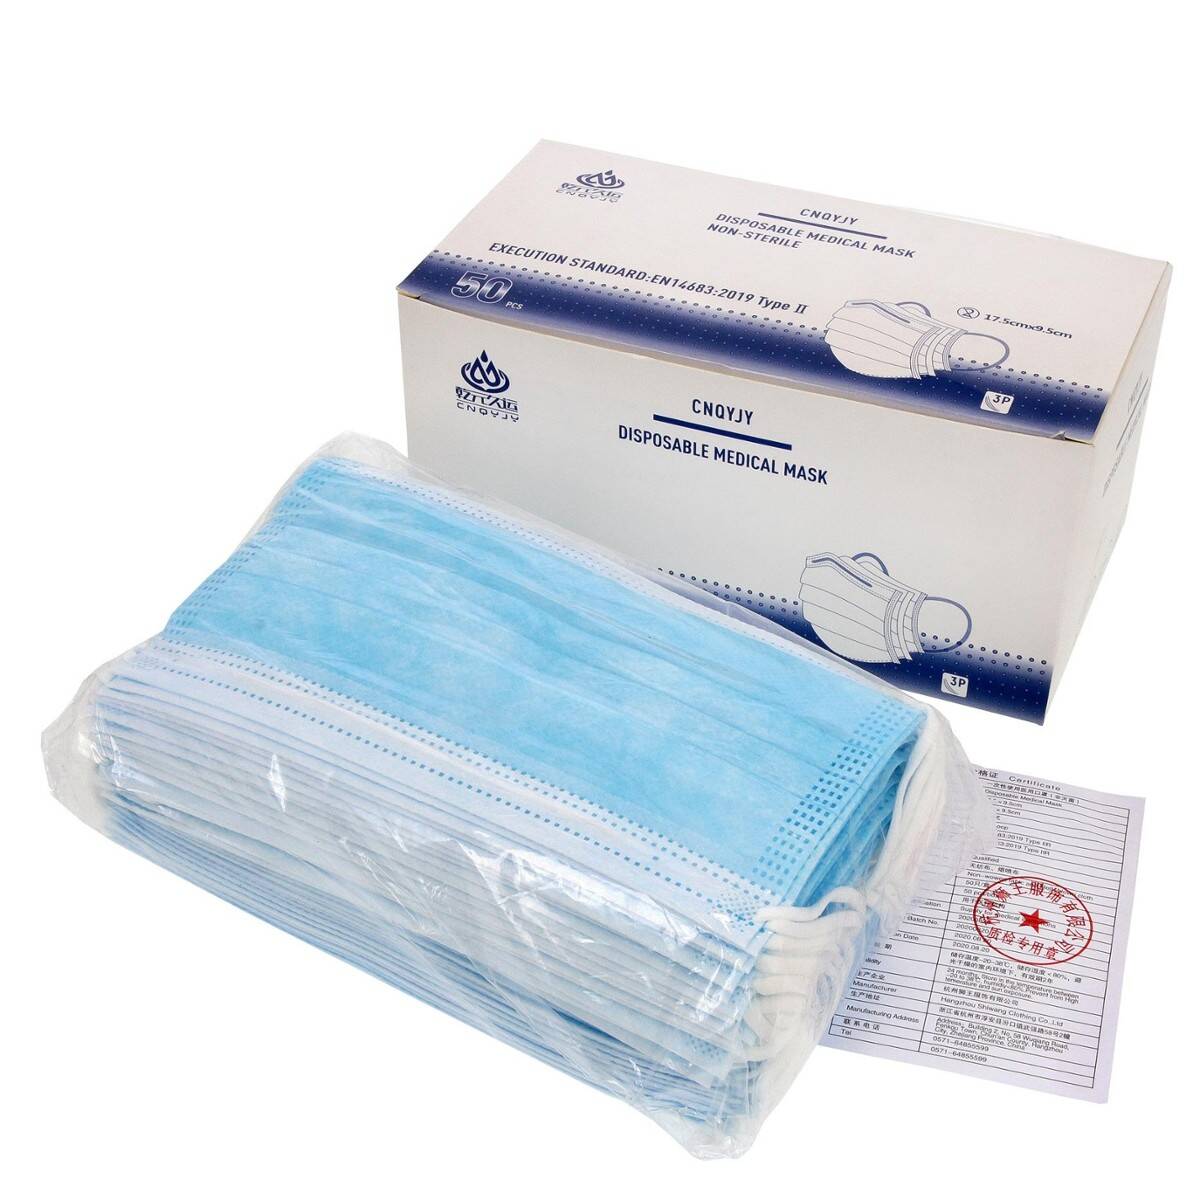 DISPOSABLE MEDICAL MASK 3 PLY 50 pcs  (surgical mask )